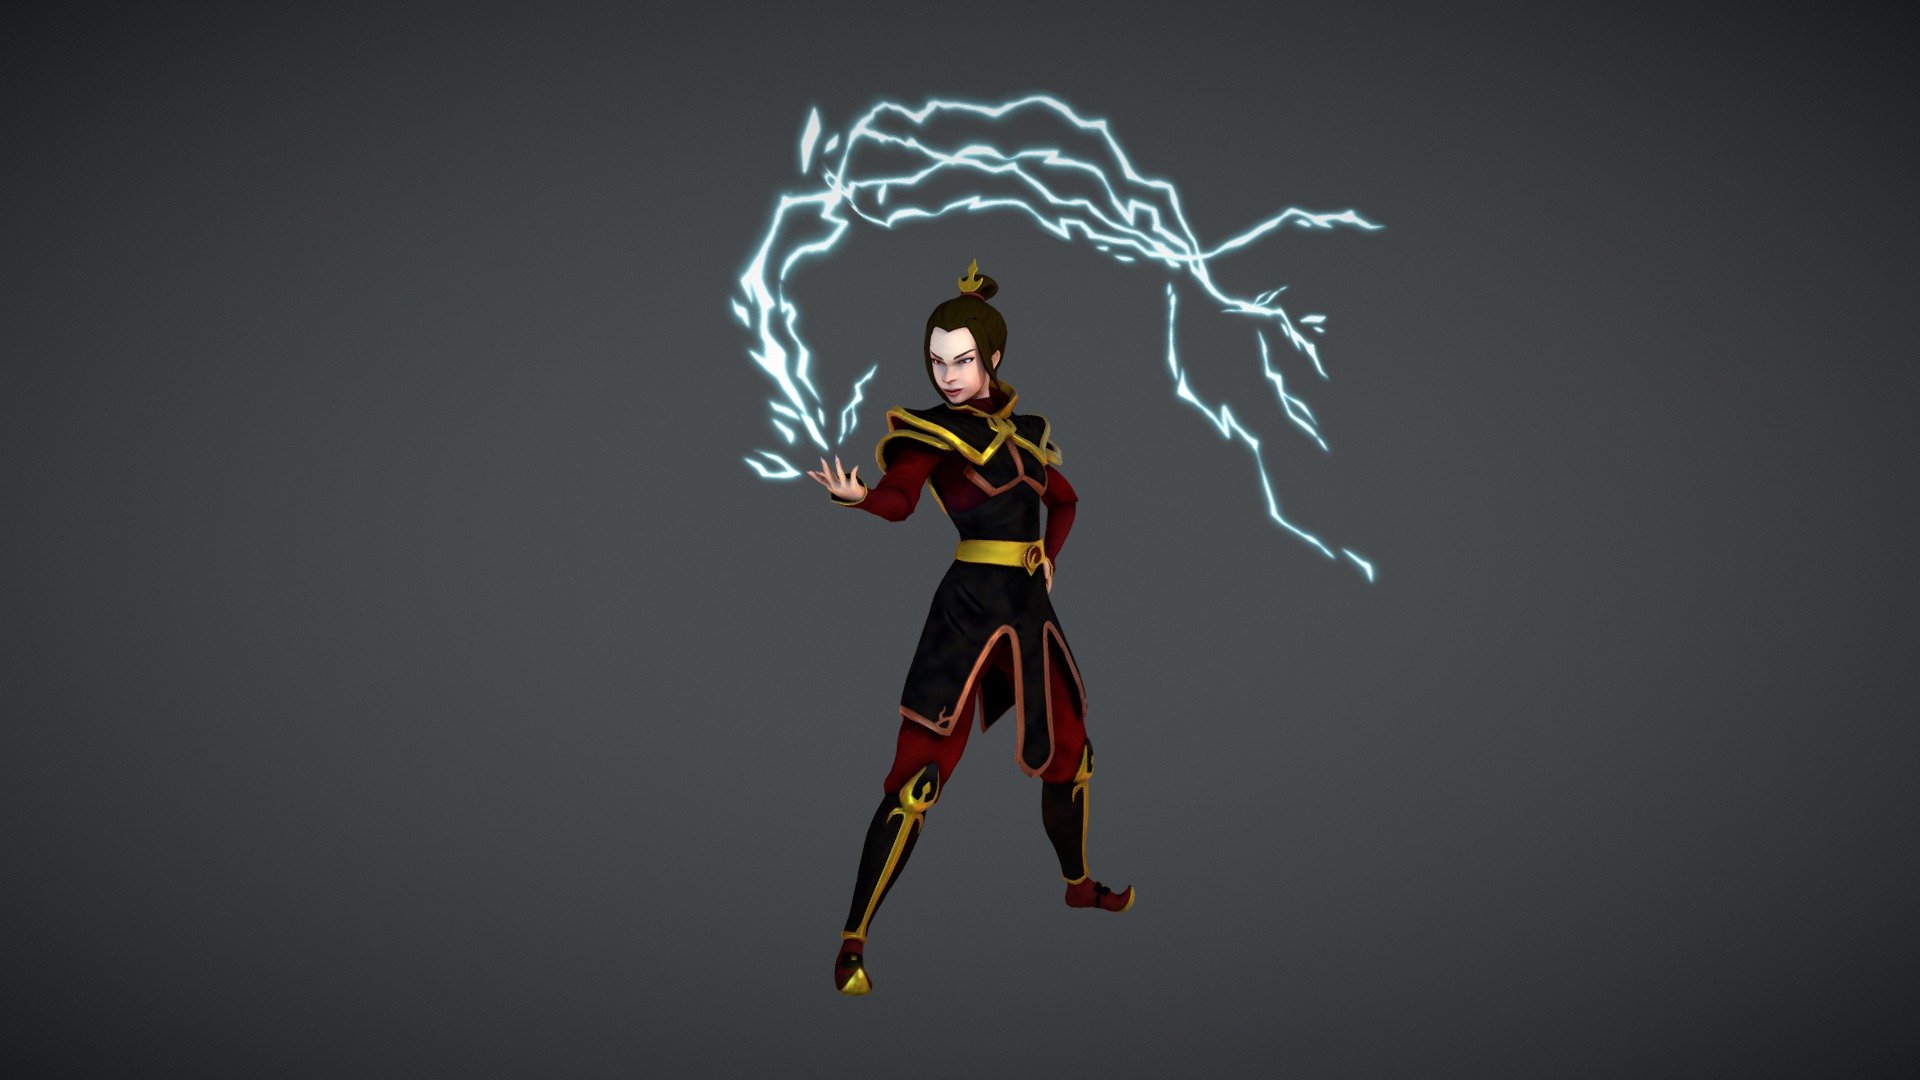 Princess Azula from Avatar: The last Airbender character model.

A personal project to further develop my learning at University and just aquire more knowledge with industry software. I started  in Zbrush, retopologised in Maya, posed in Zbrush, baked and textured in Substance Painter. I am pretty happy with the outcome being my first character retopology and although there is a lot of stuff I would do different if I was to make it again, I believe it is better to take all the new lessons learnt onto my next project. 

A lot more renders of this over at my Artstation, grizzlewood.Artstation.com - Princess Azula - 3D model by Grizzlewood 3d model